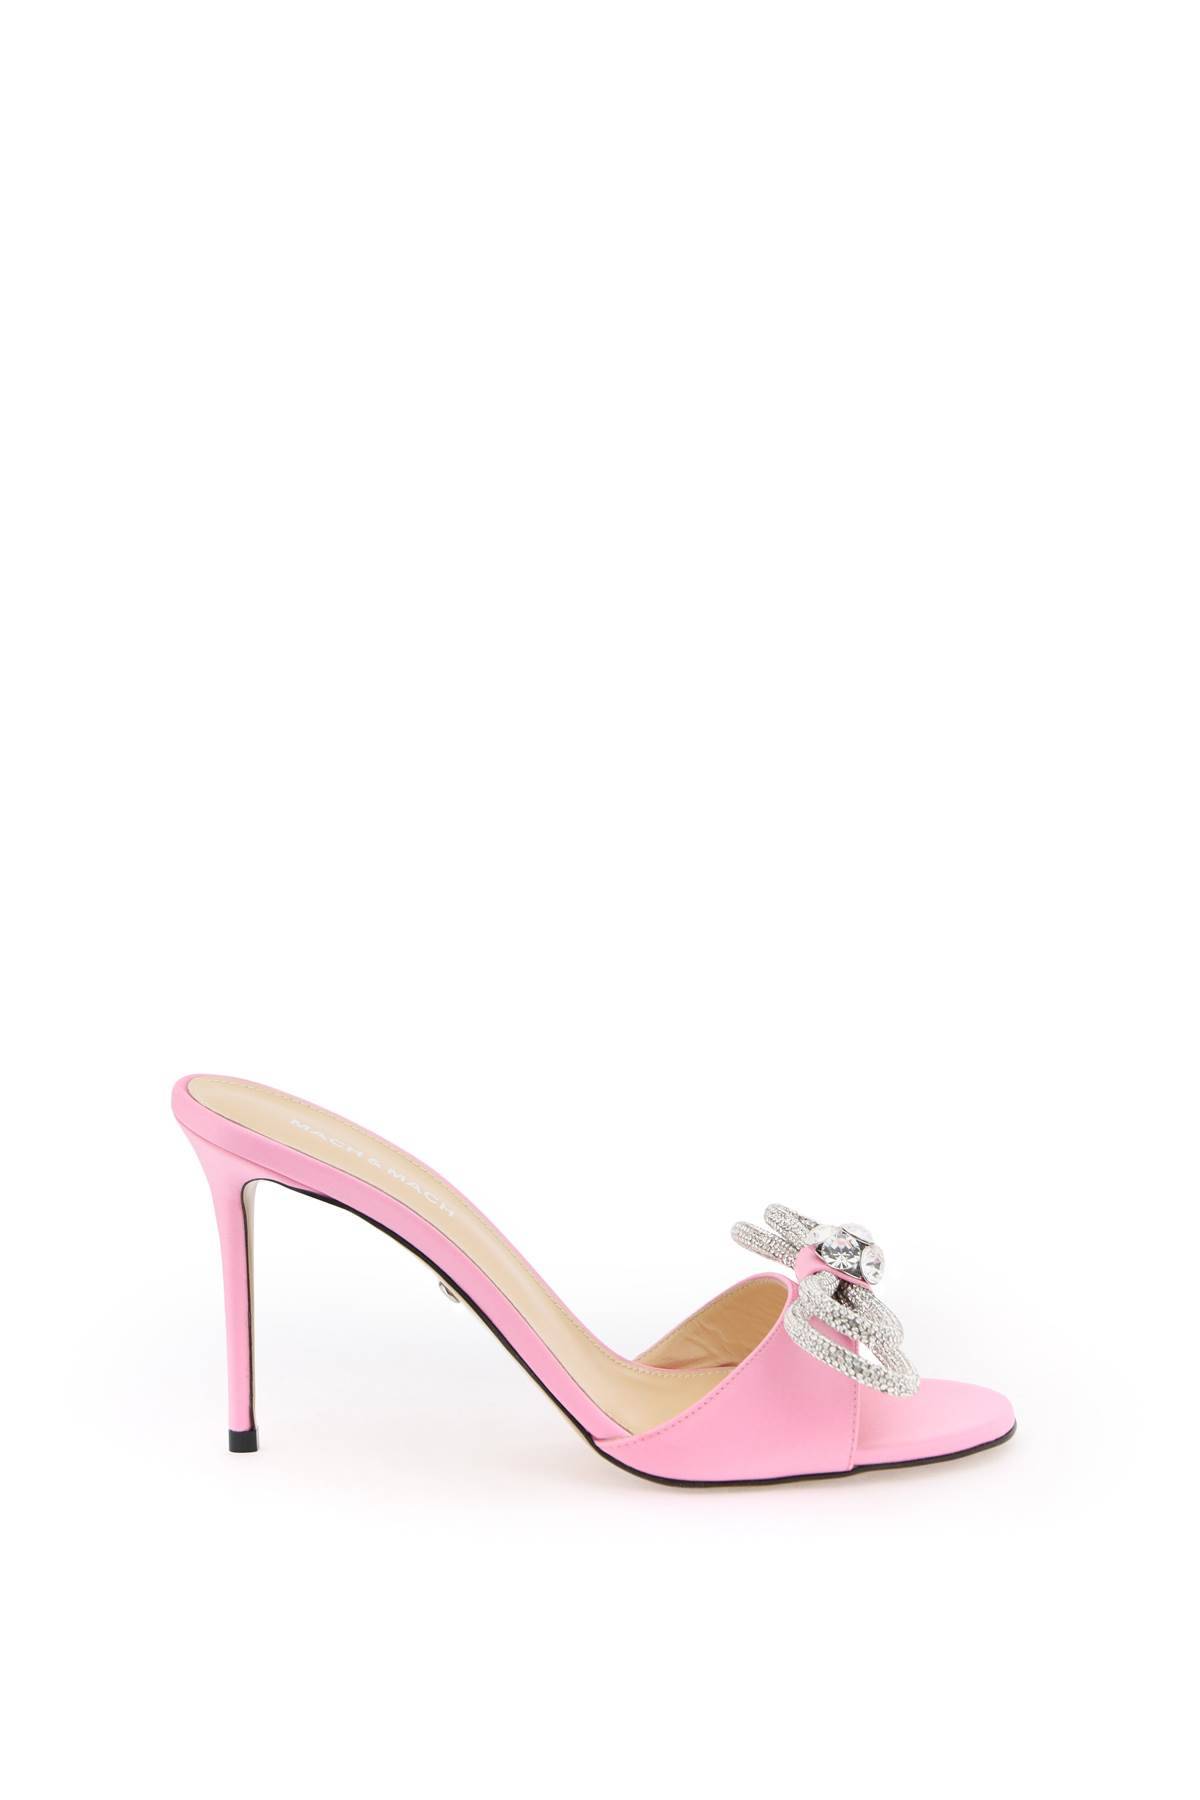 Mach & Mach Mules With Crystals In Pink